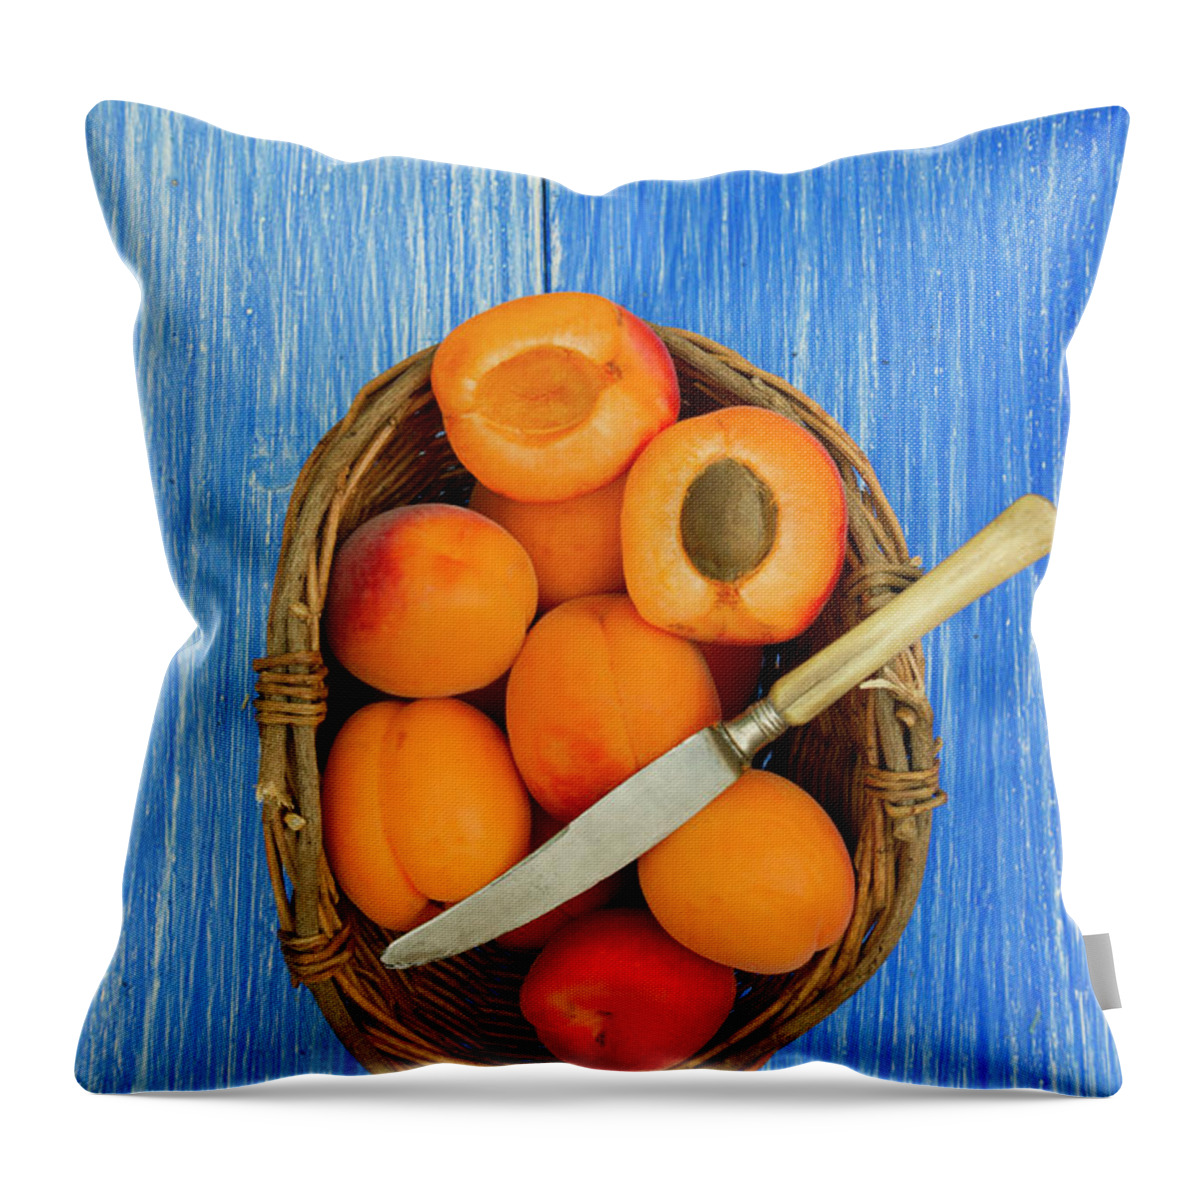 Apricot Throw Pillow featuring the photograph Apricots In Basket With Knife On Table by Westend61